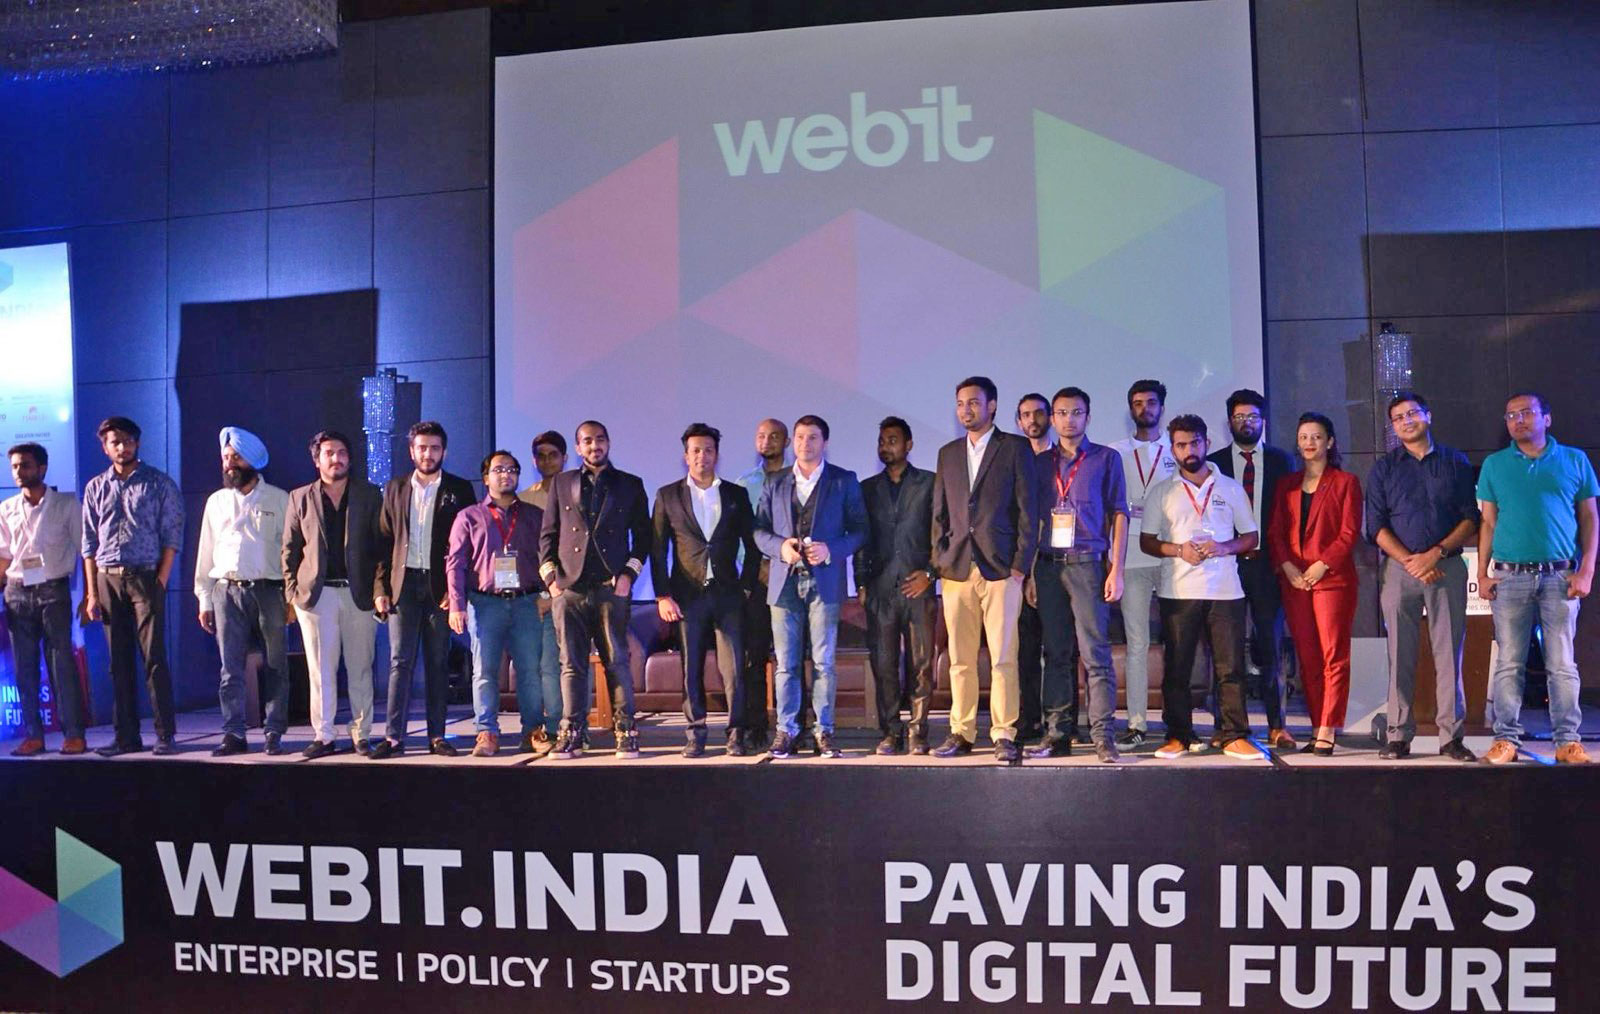 Plamen Russev at Webit.India stage with the local Webit team